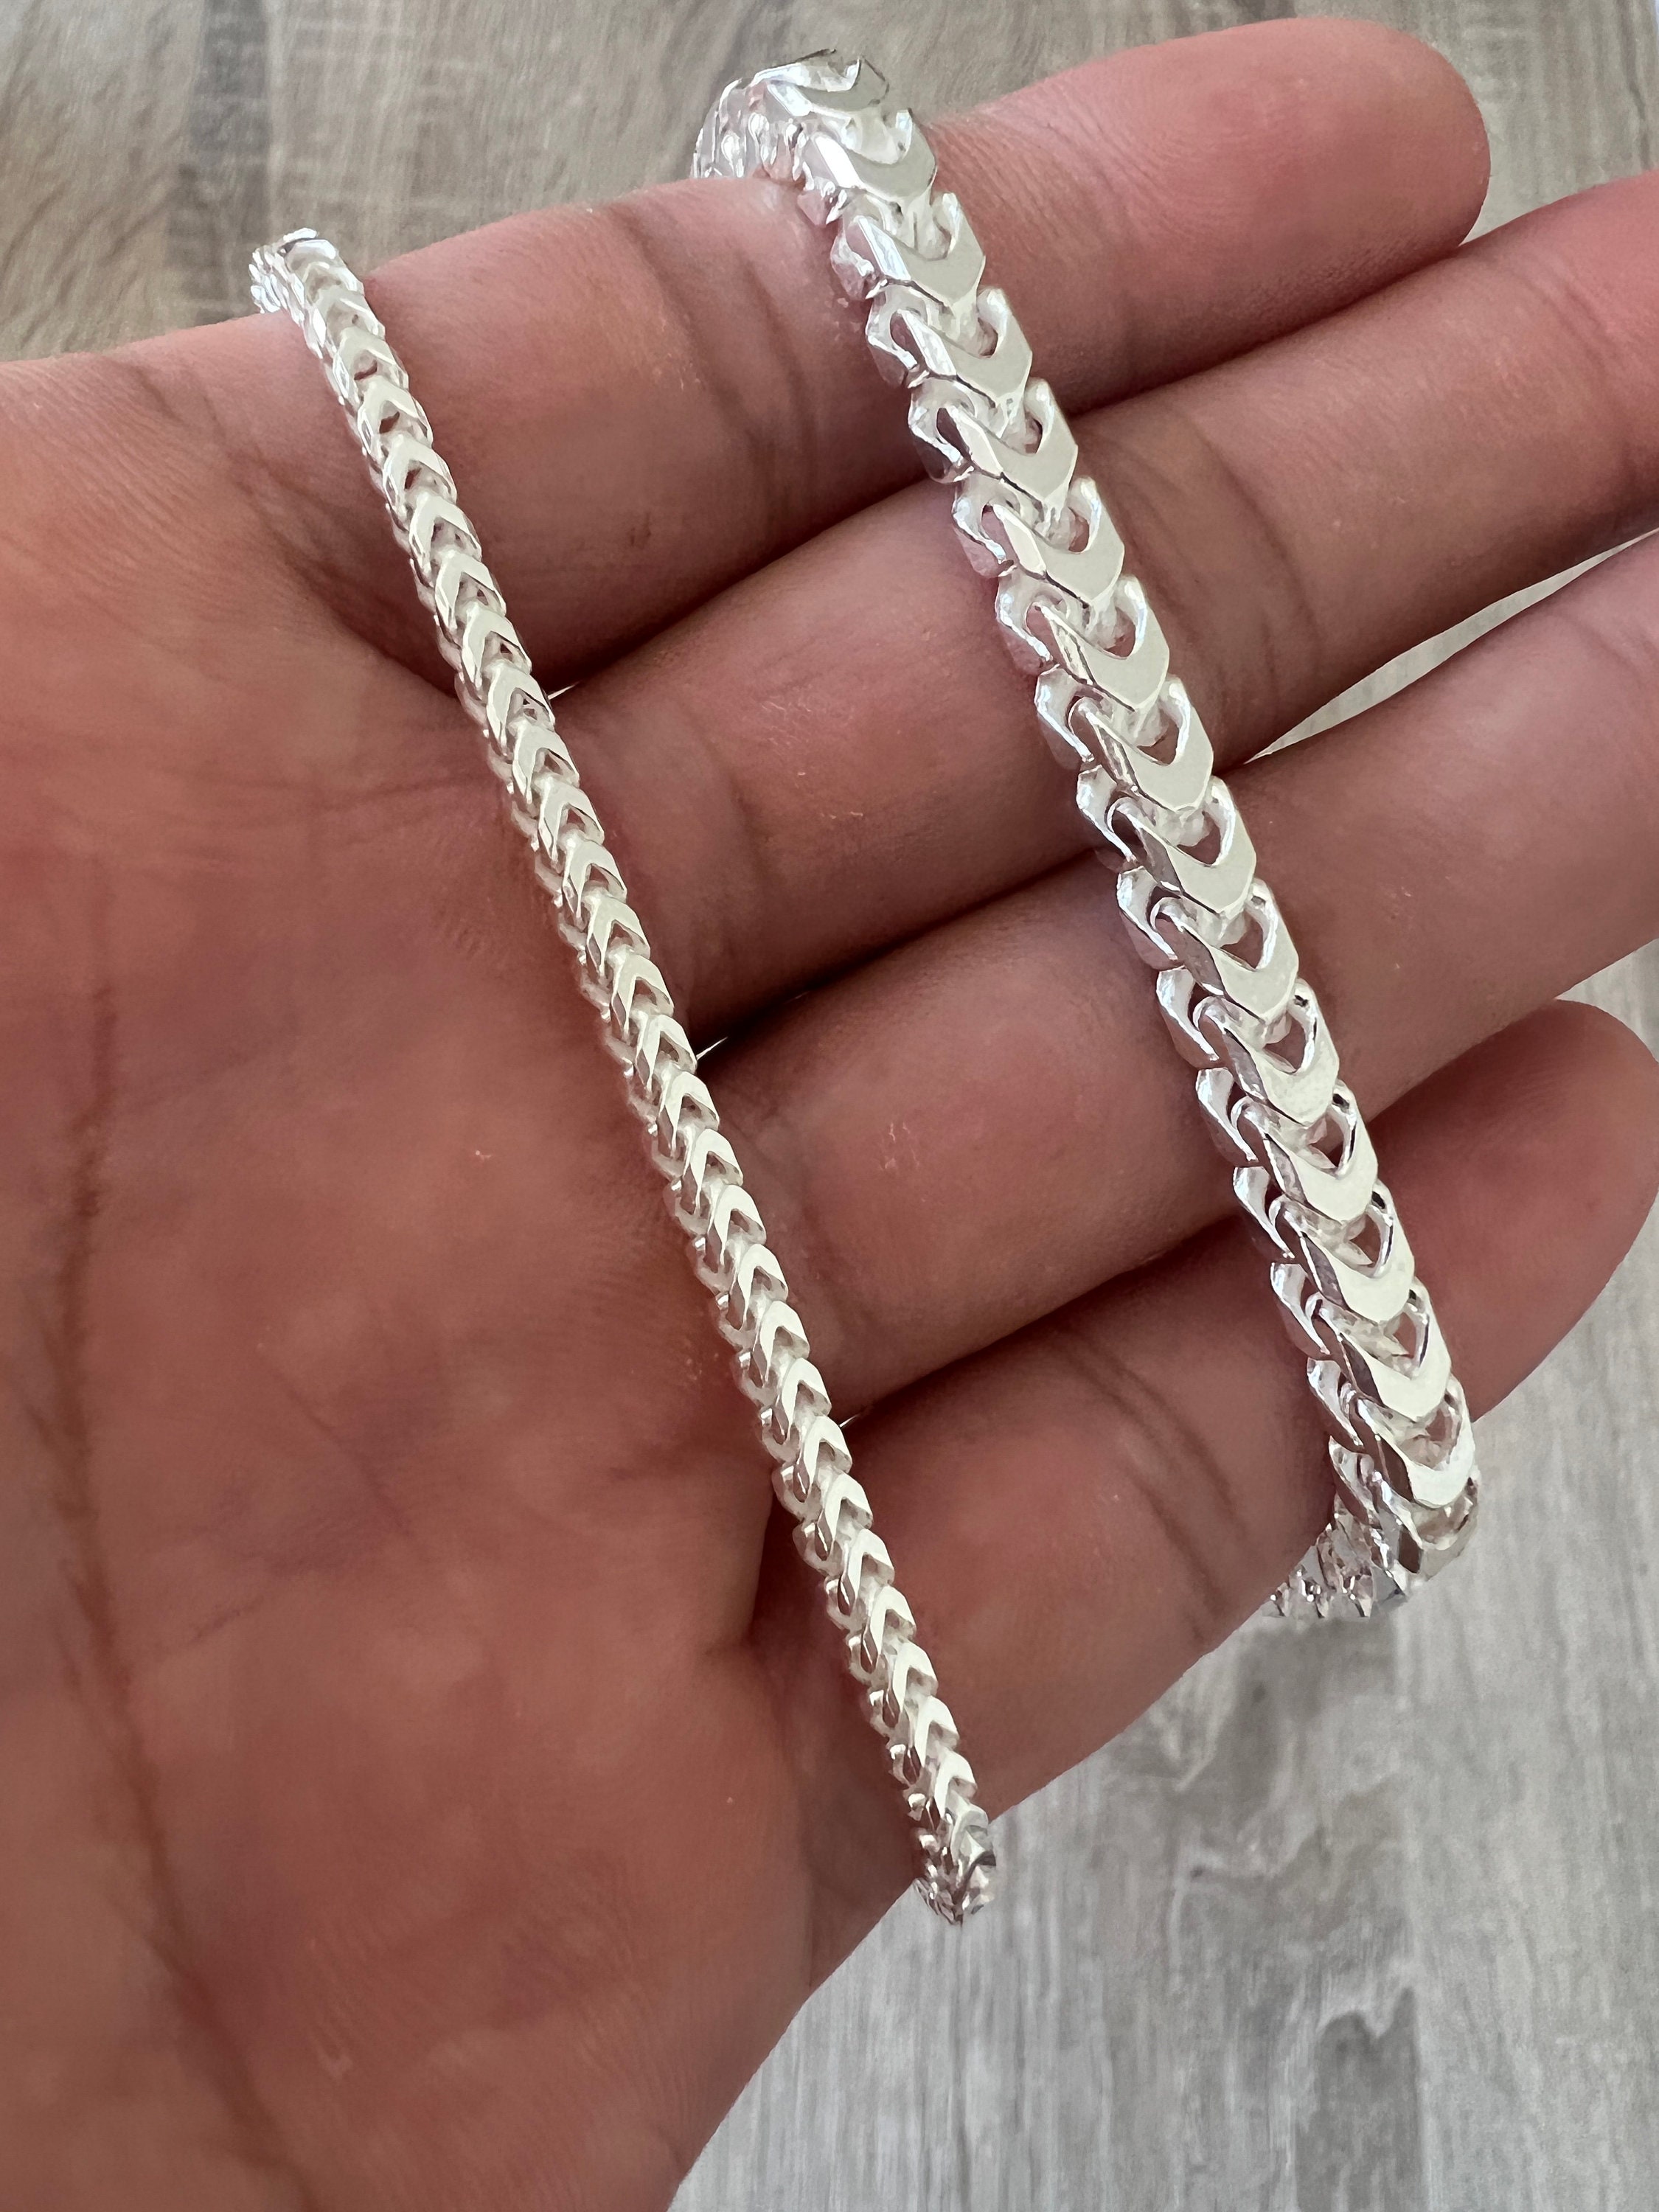 5mm 925 Franco Sterling Silver Solid Chain Bracelet Necklace Diamond Cut  High Heavy Polish for Men and Woman Unisex in 2.5mm 5mm Italian - Etsy